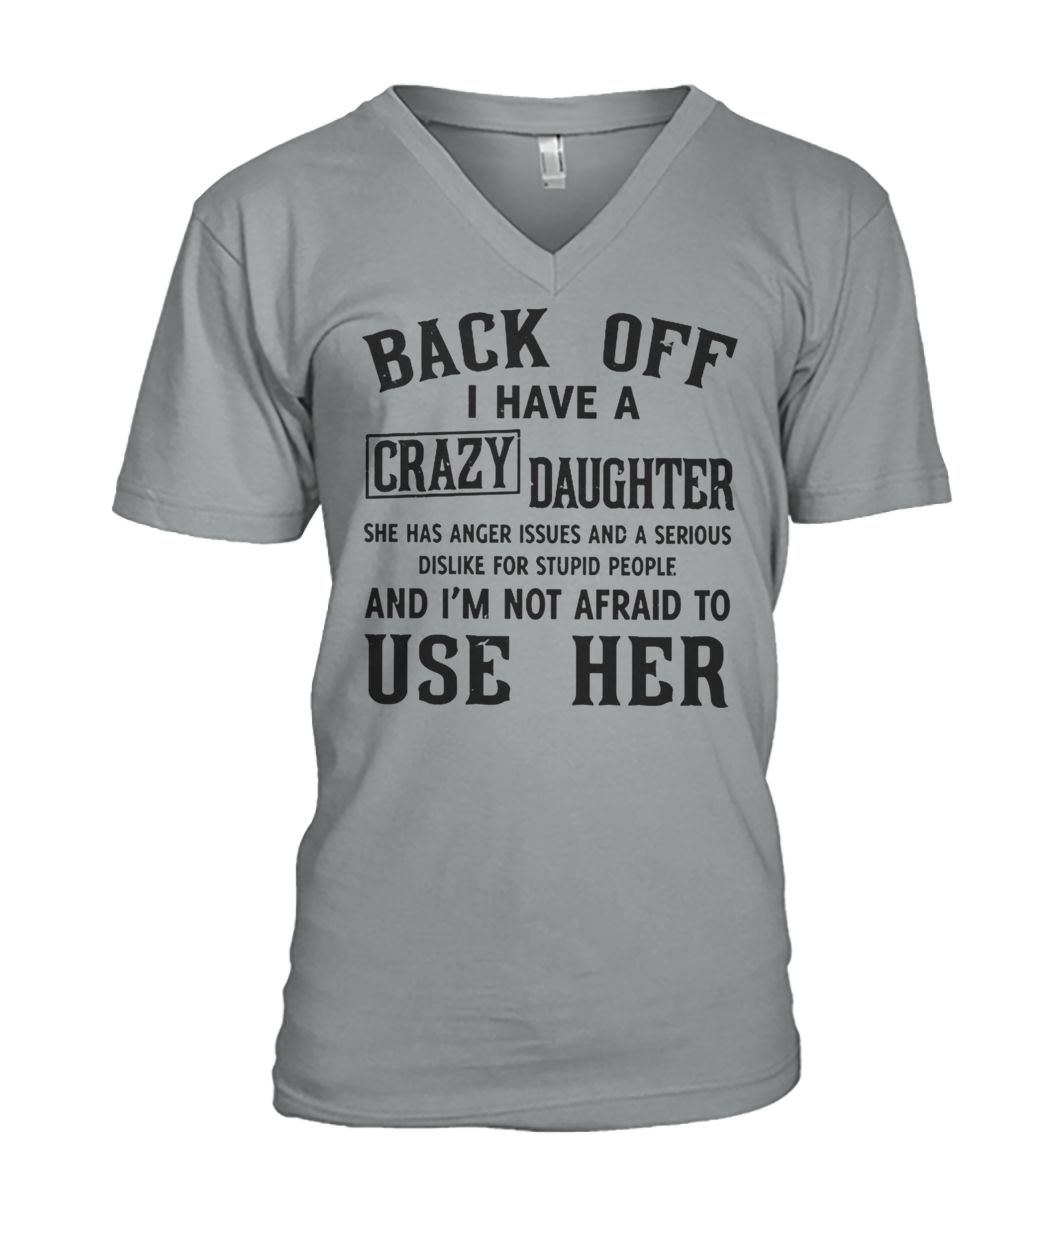 Back off I have a crazy daughter she has anger issues and a serious dislike for stupid people mens v-neck